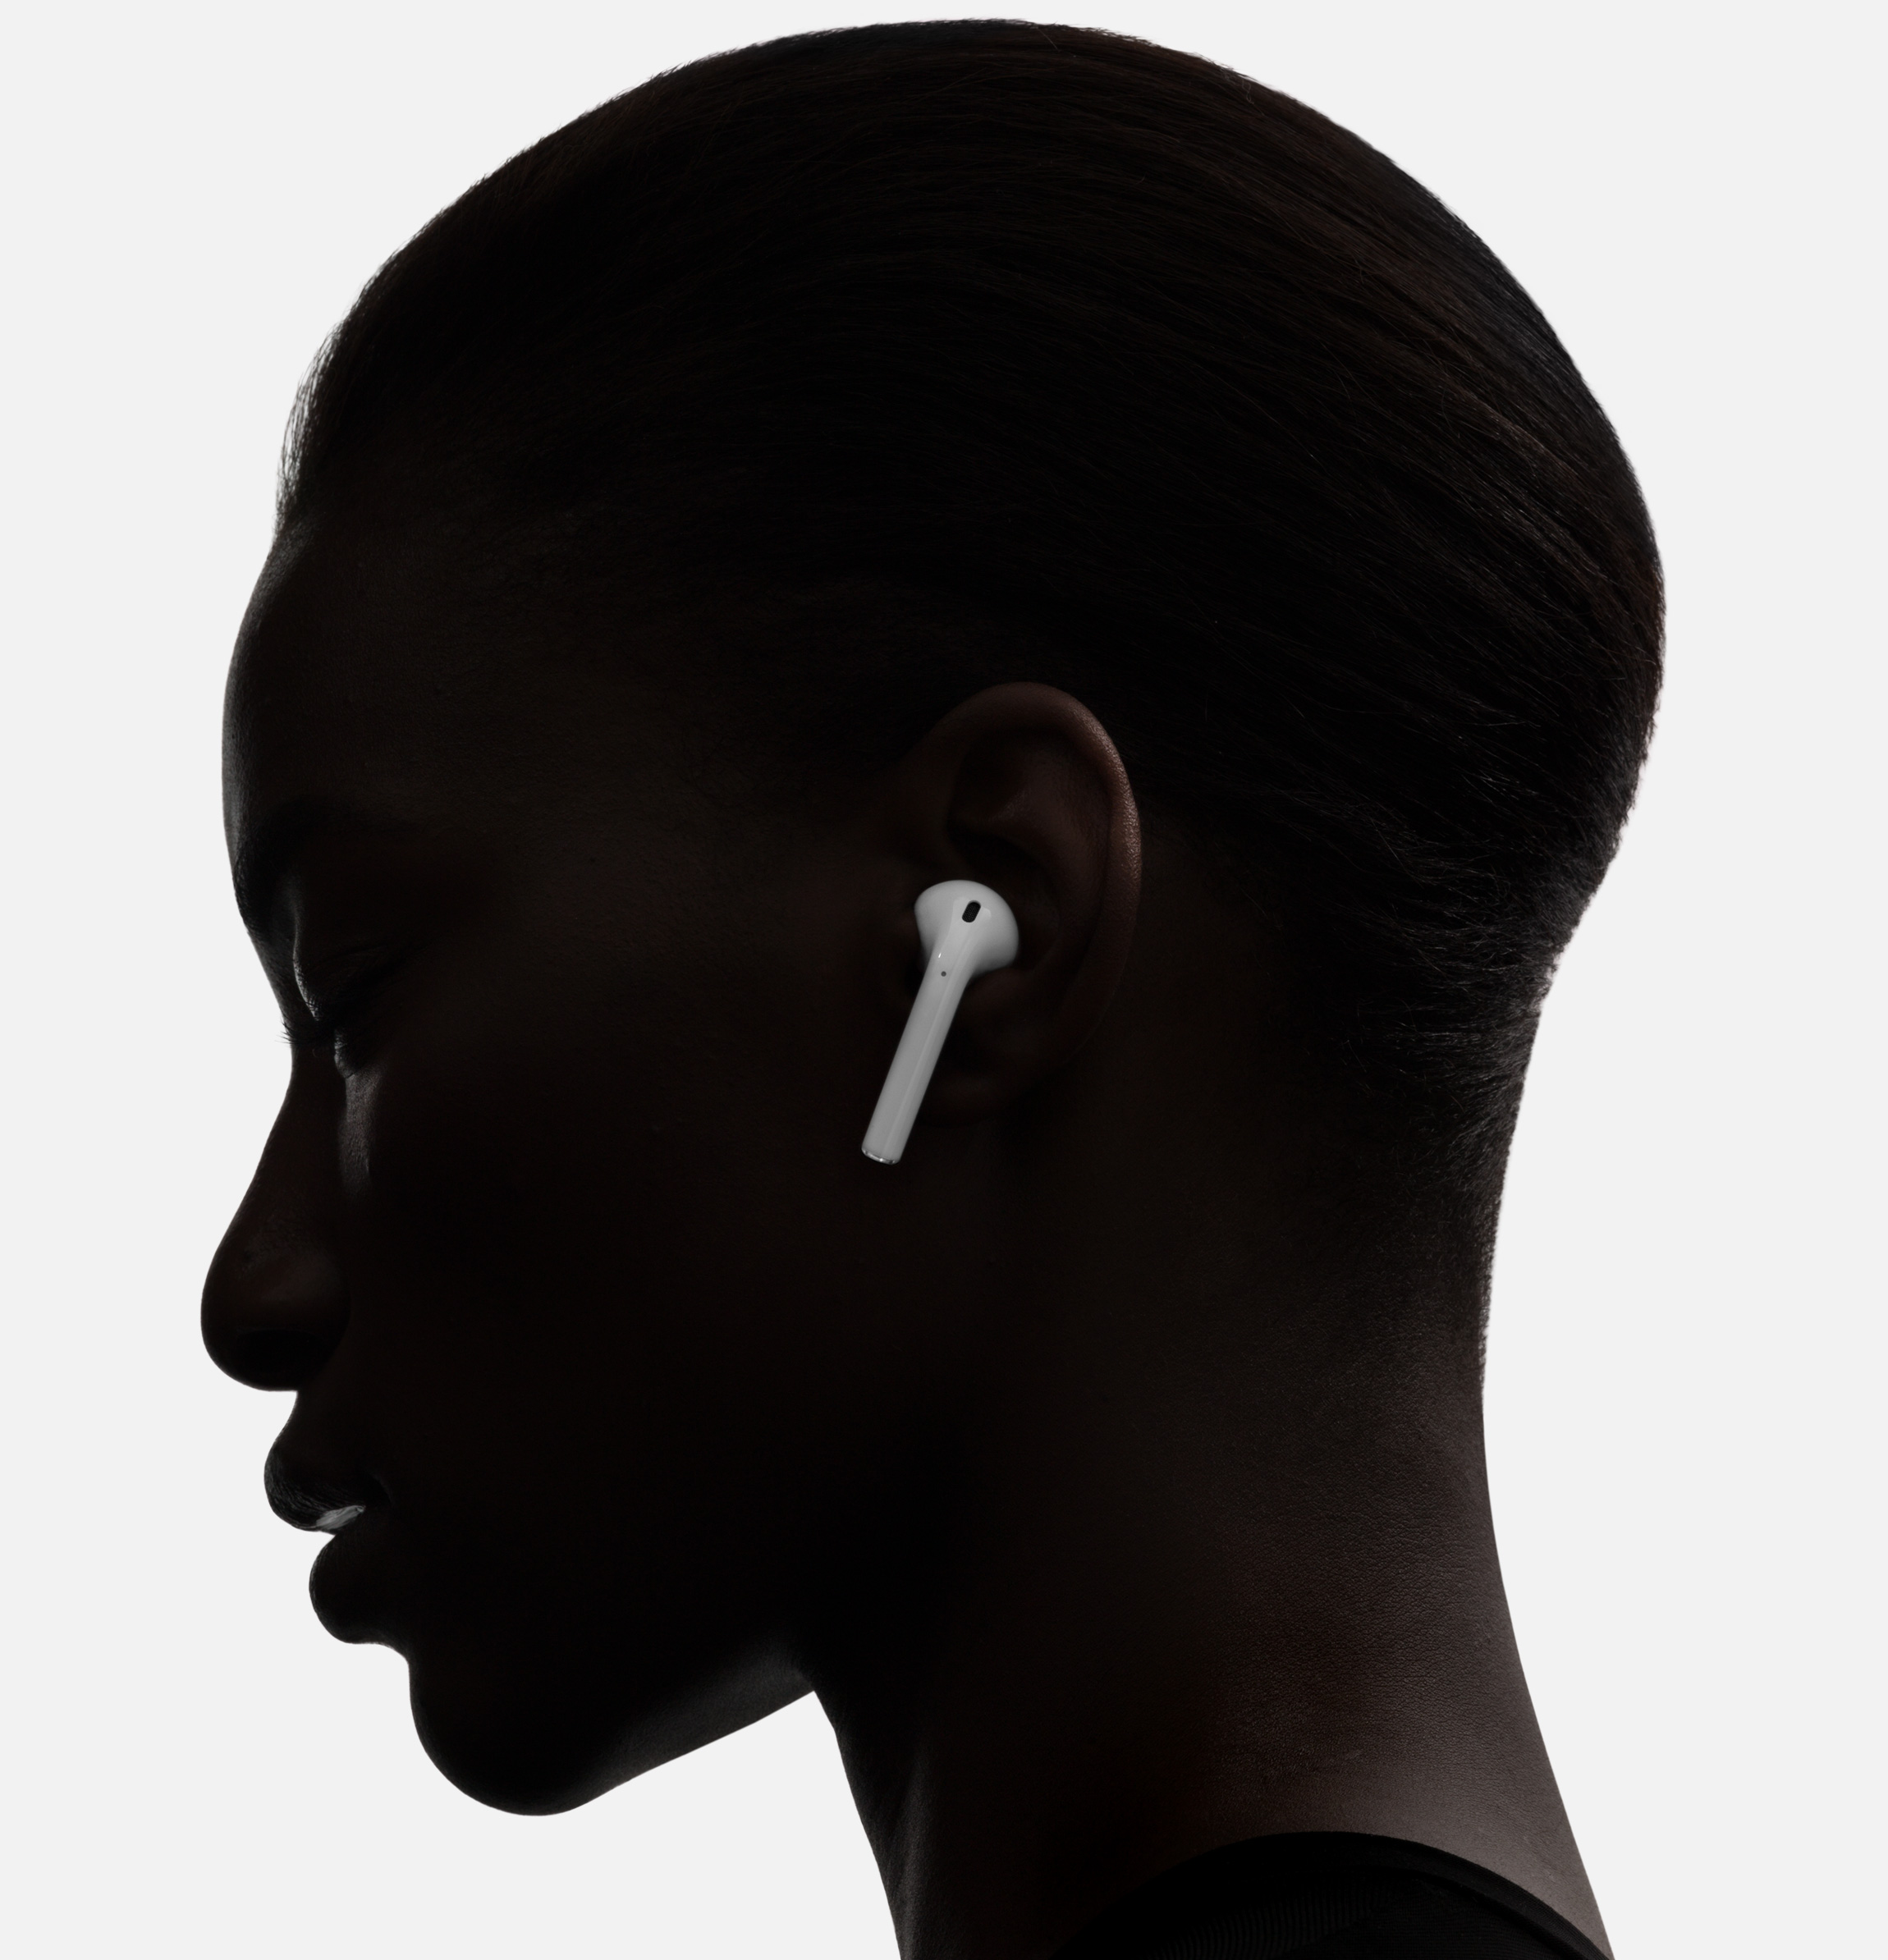 AirPods-woman-image-001